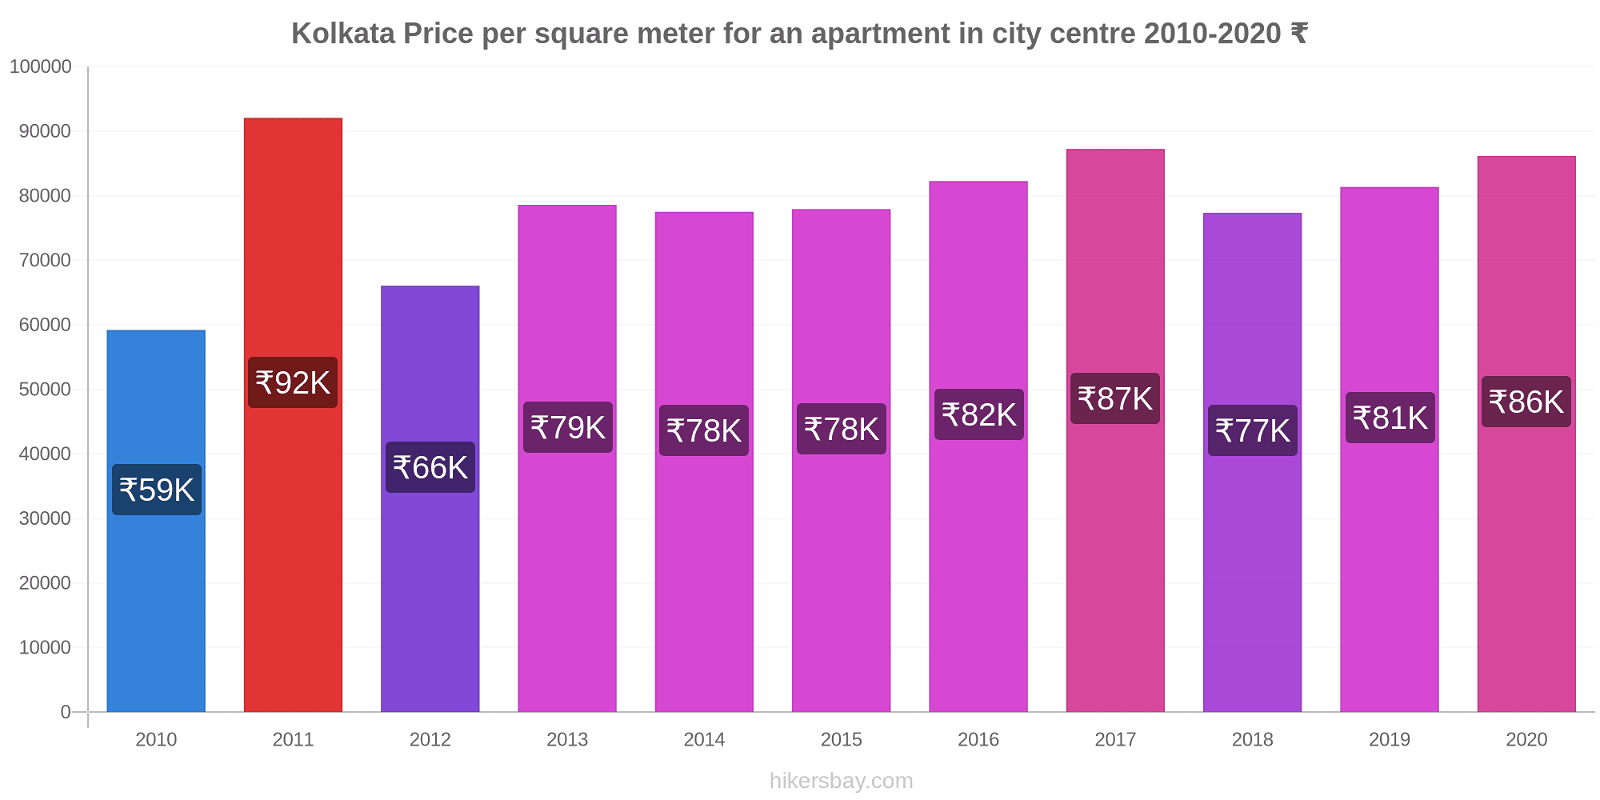 Kolkata price changes Price per square meter for an apartment in city centre hikersbay.com